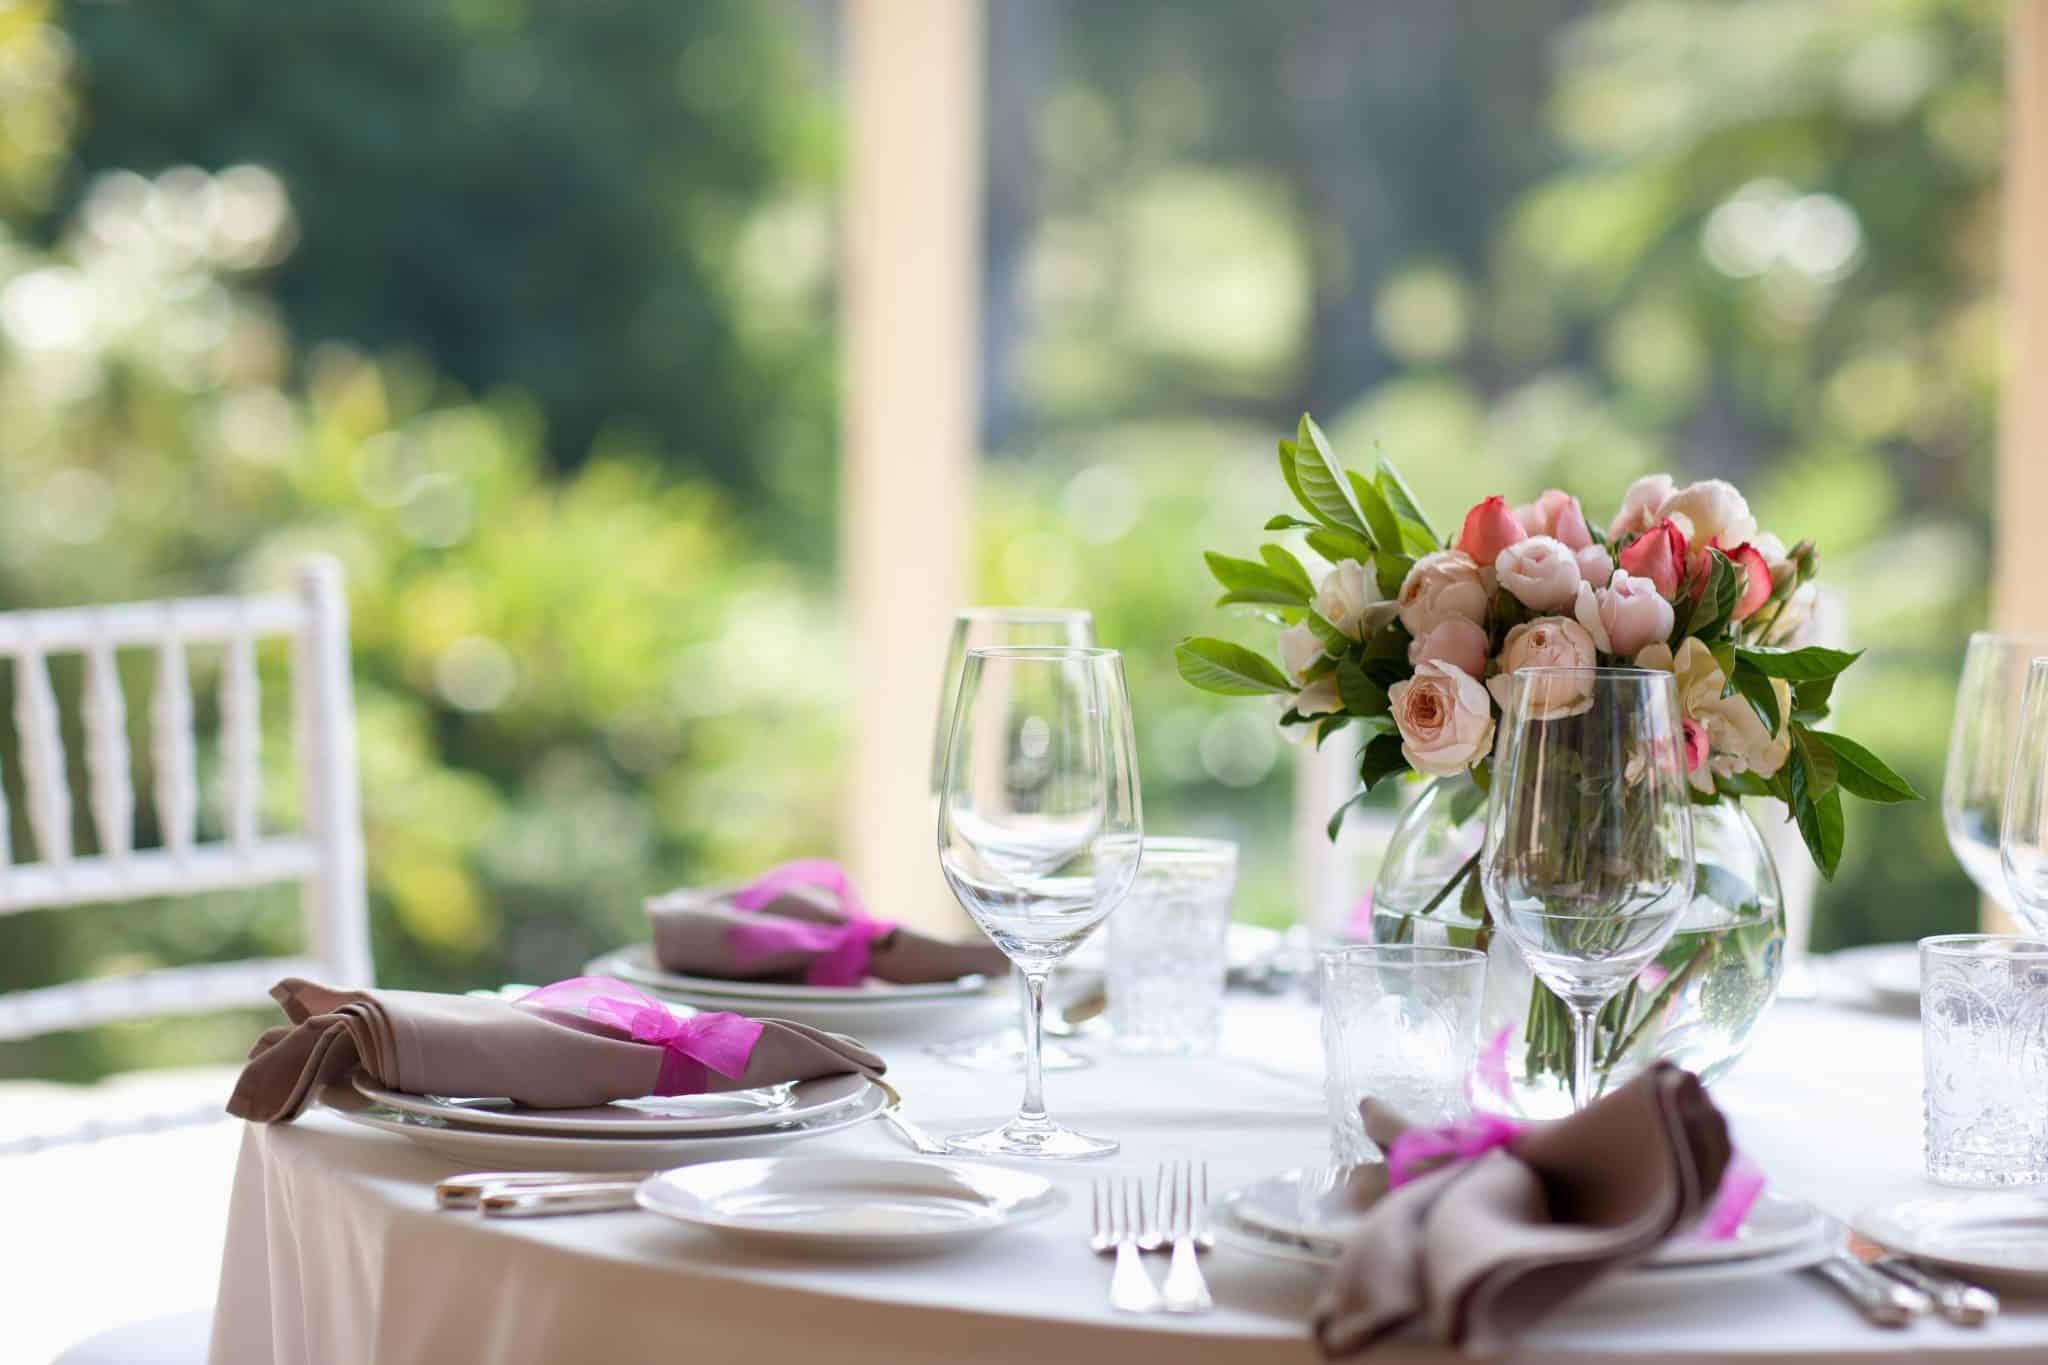 A majestic wedding table scene found at luxurious wedding venues in Birmingham